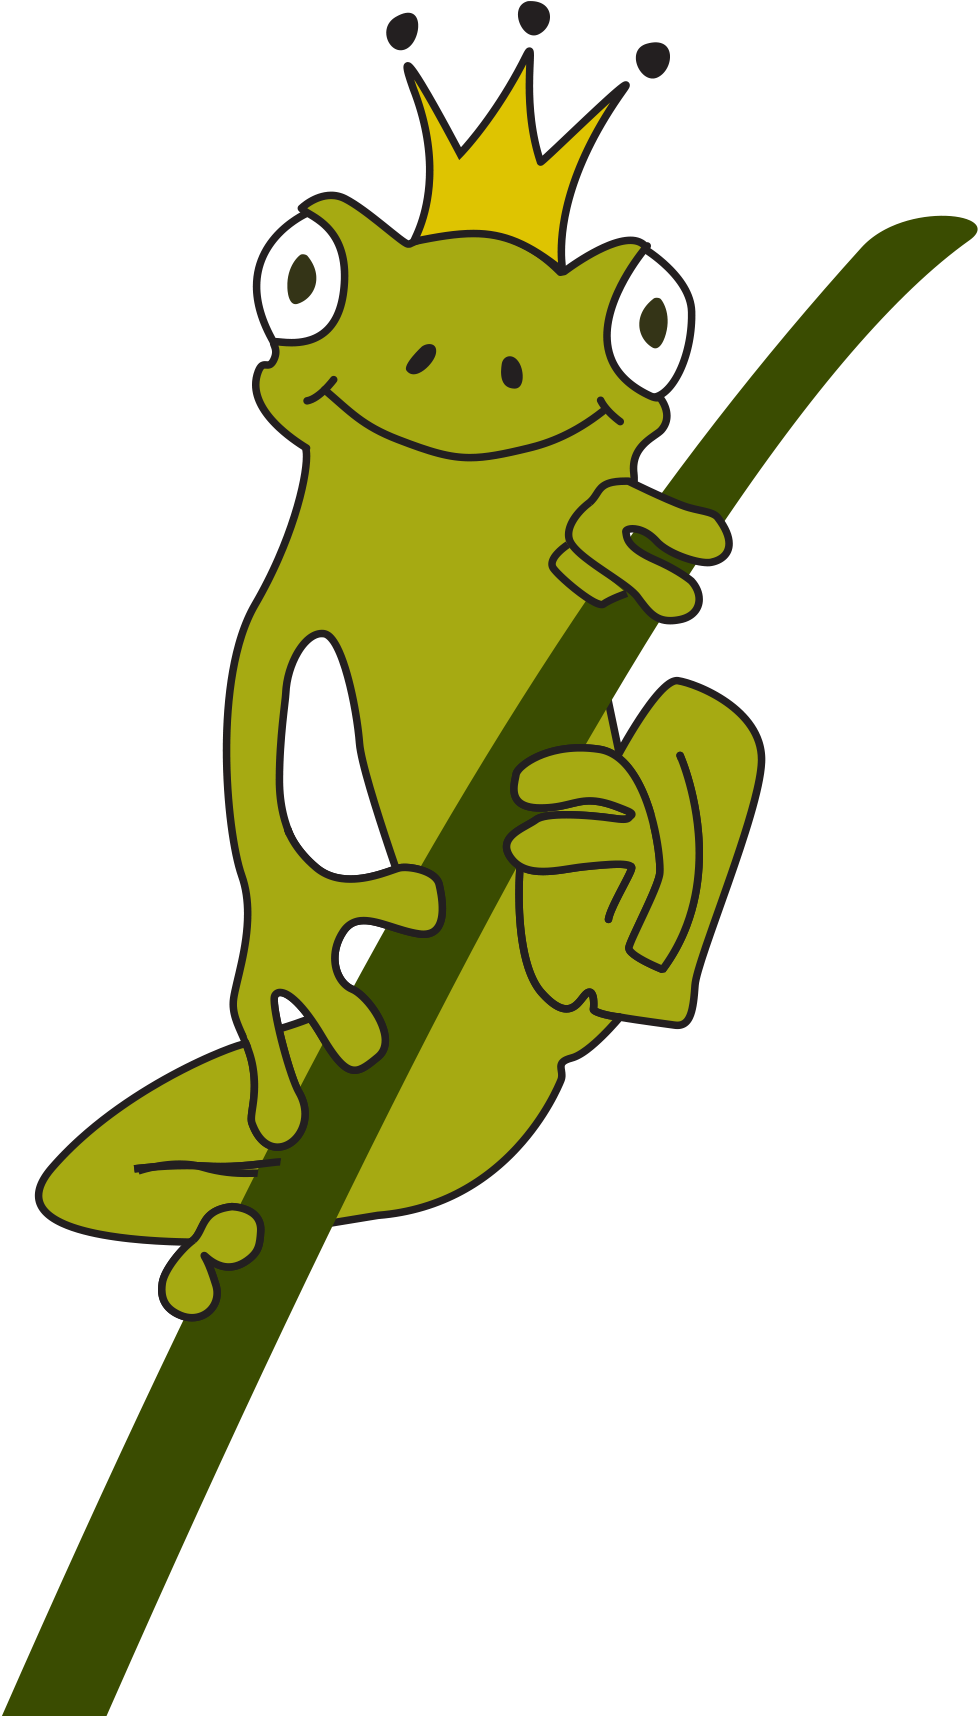 The Kiss The Frog Activities Are Included In The Admission - Logo (1389x1723)